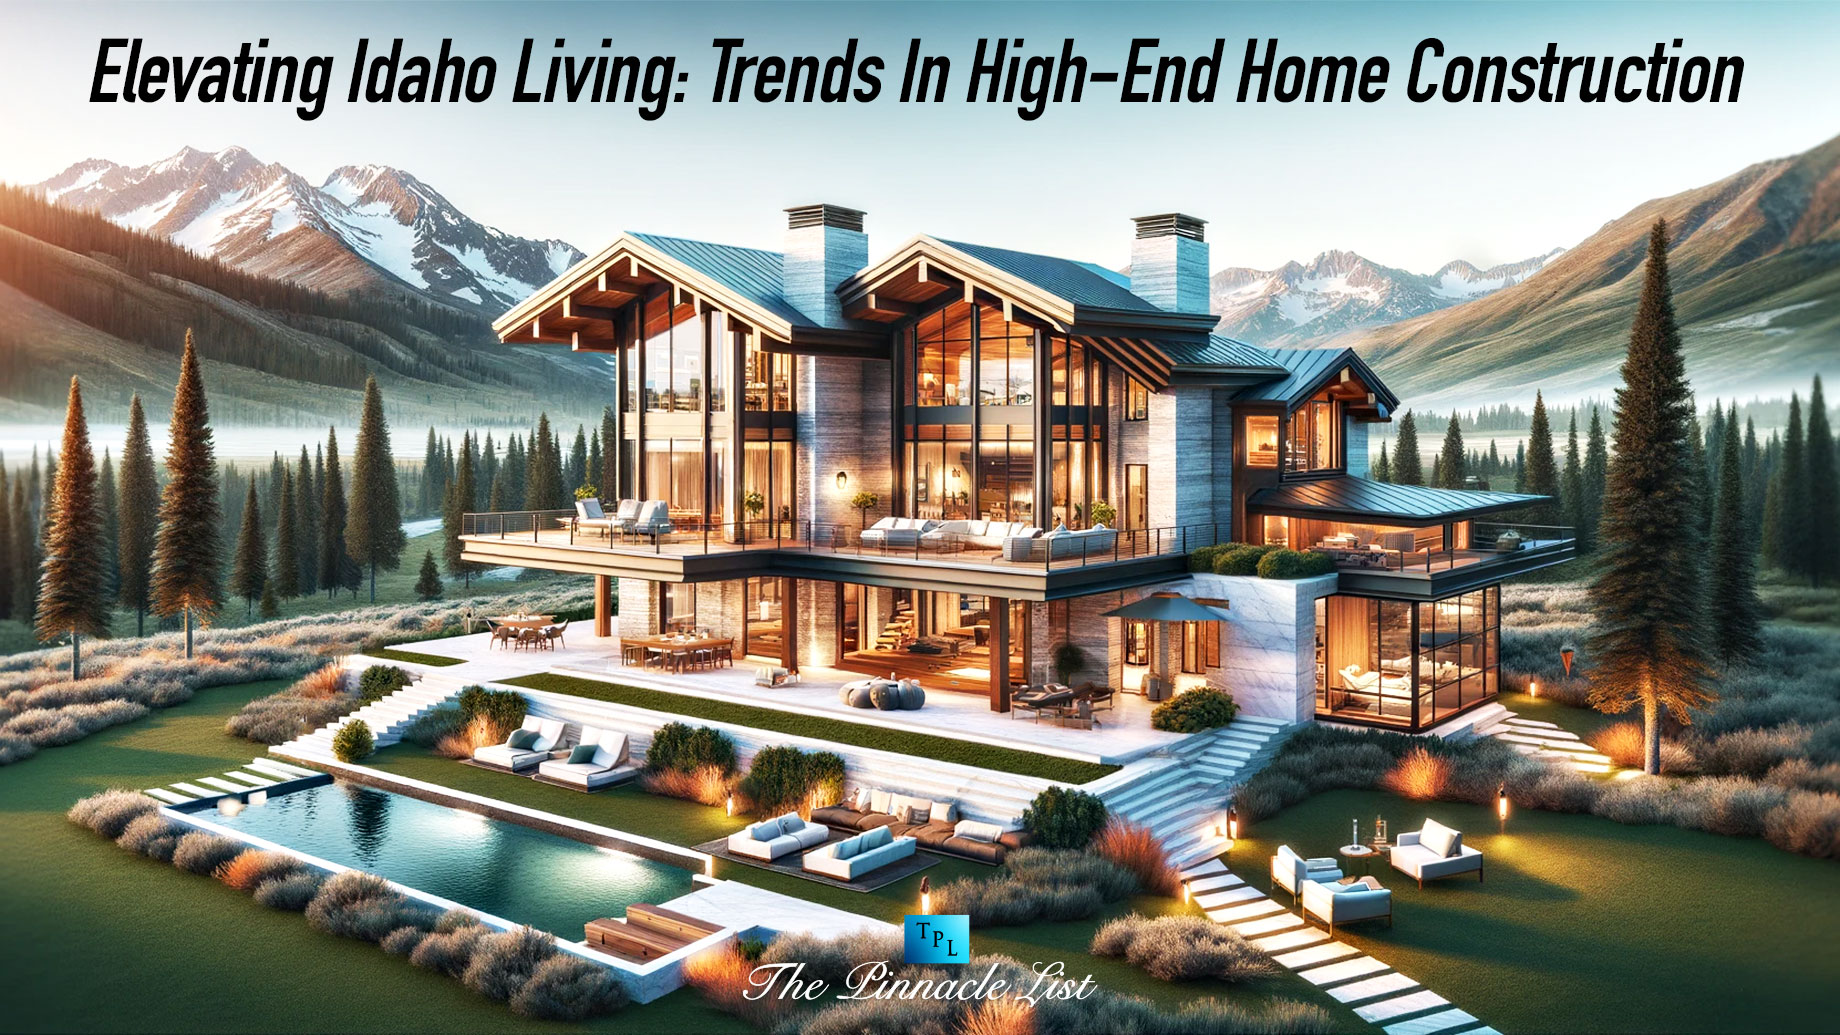 Elevating Idaho Living: Trends In High-End Home Construction